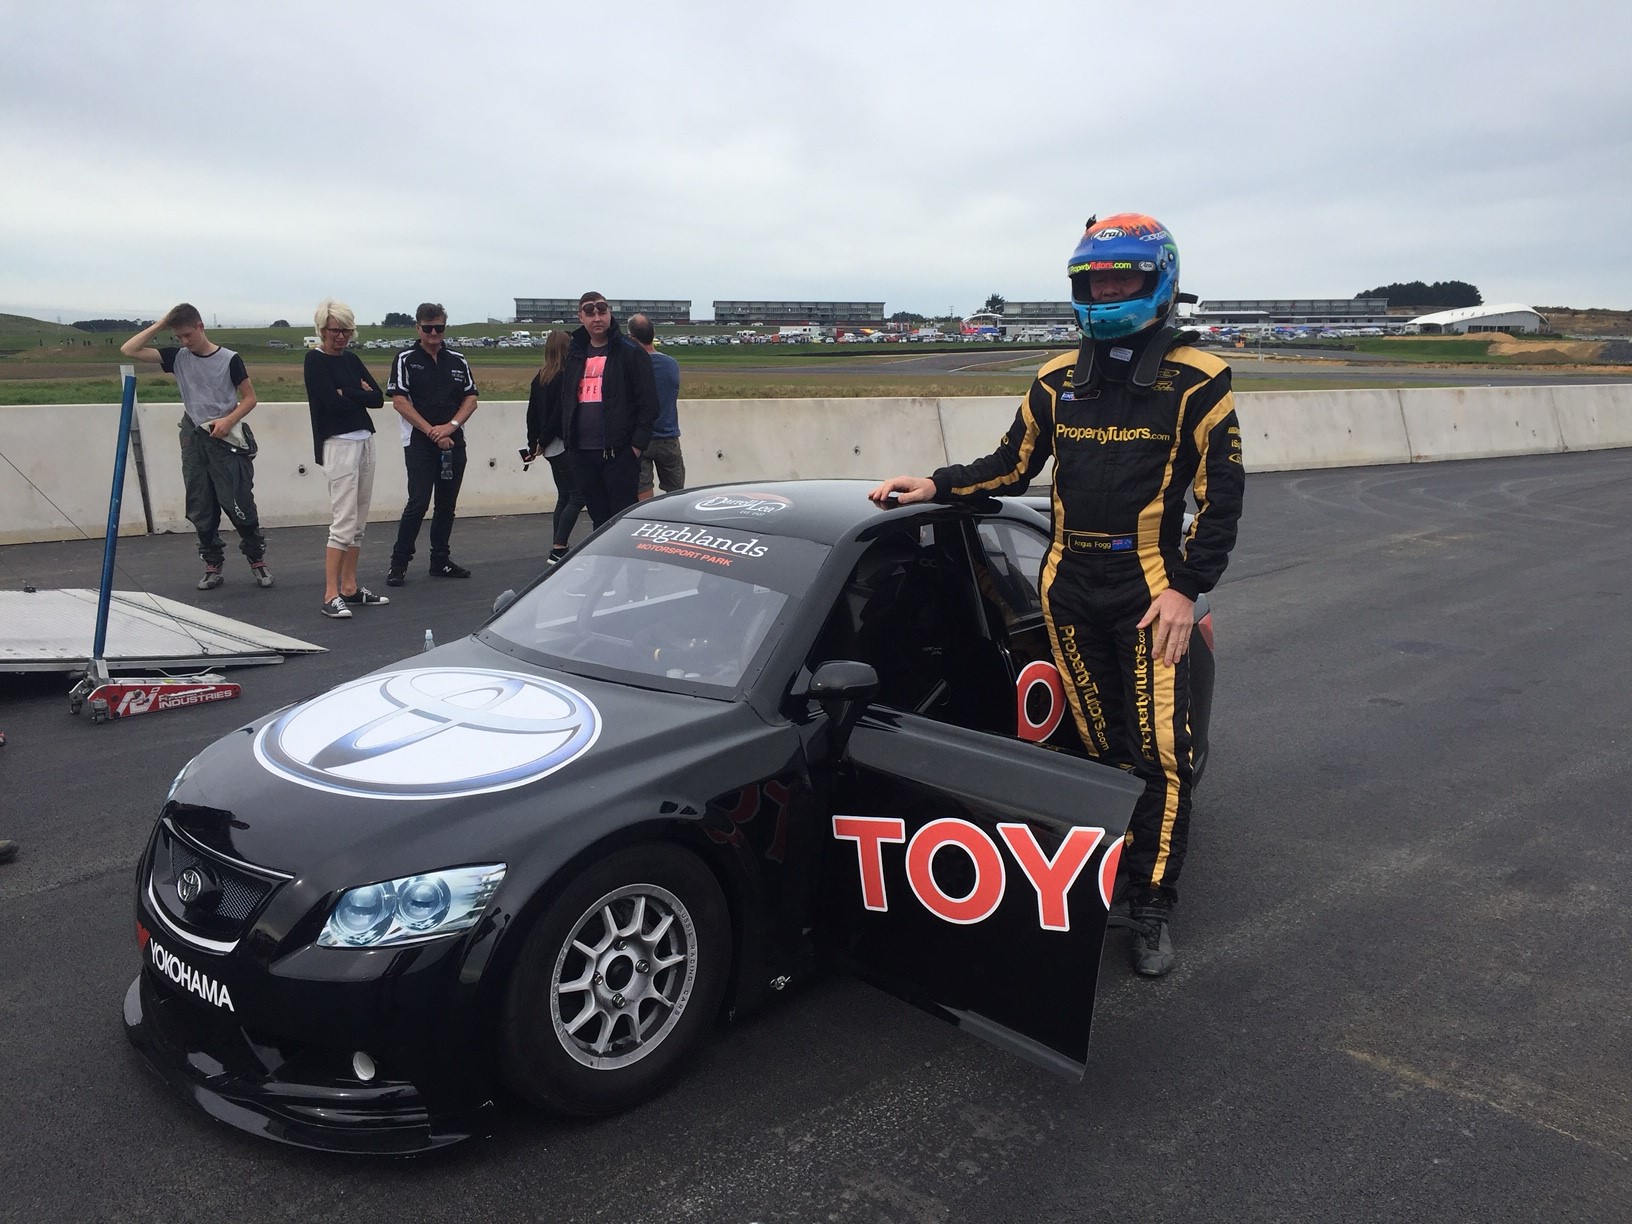 Great feedback from first tests in NZ Racing Cars